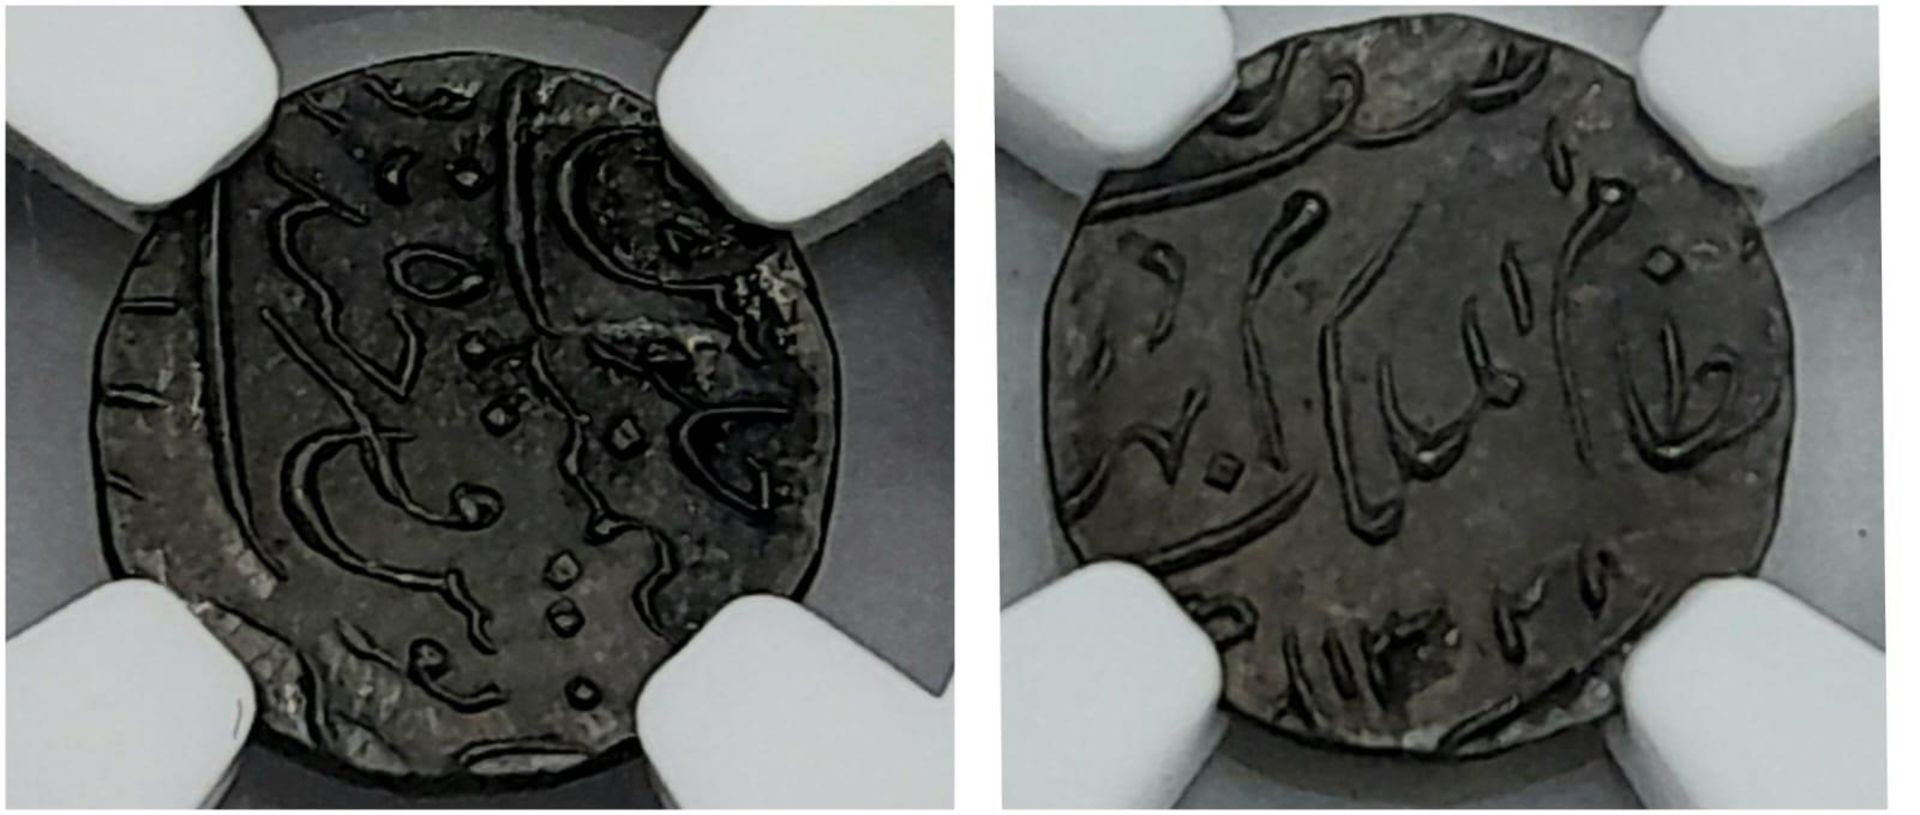 An NGC 1889 Indian 1/8 Rupee Silver Coin - Hyderabad Mint. Comes in a protective hard plastic wallet - Image 3 of 8